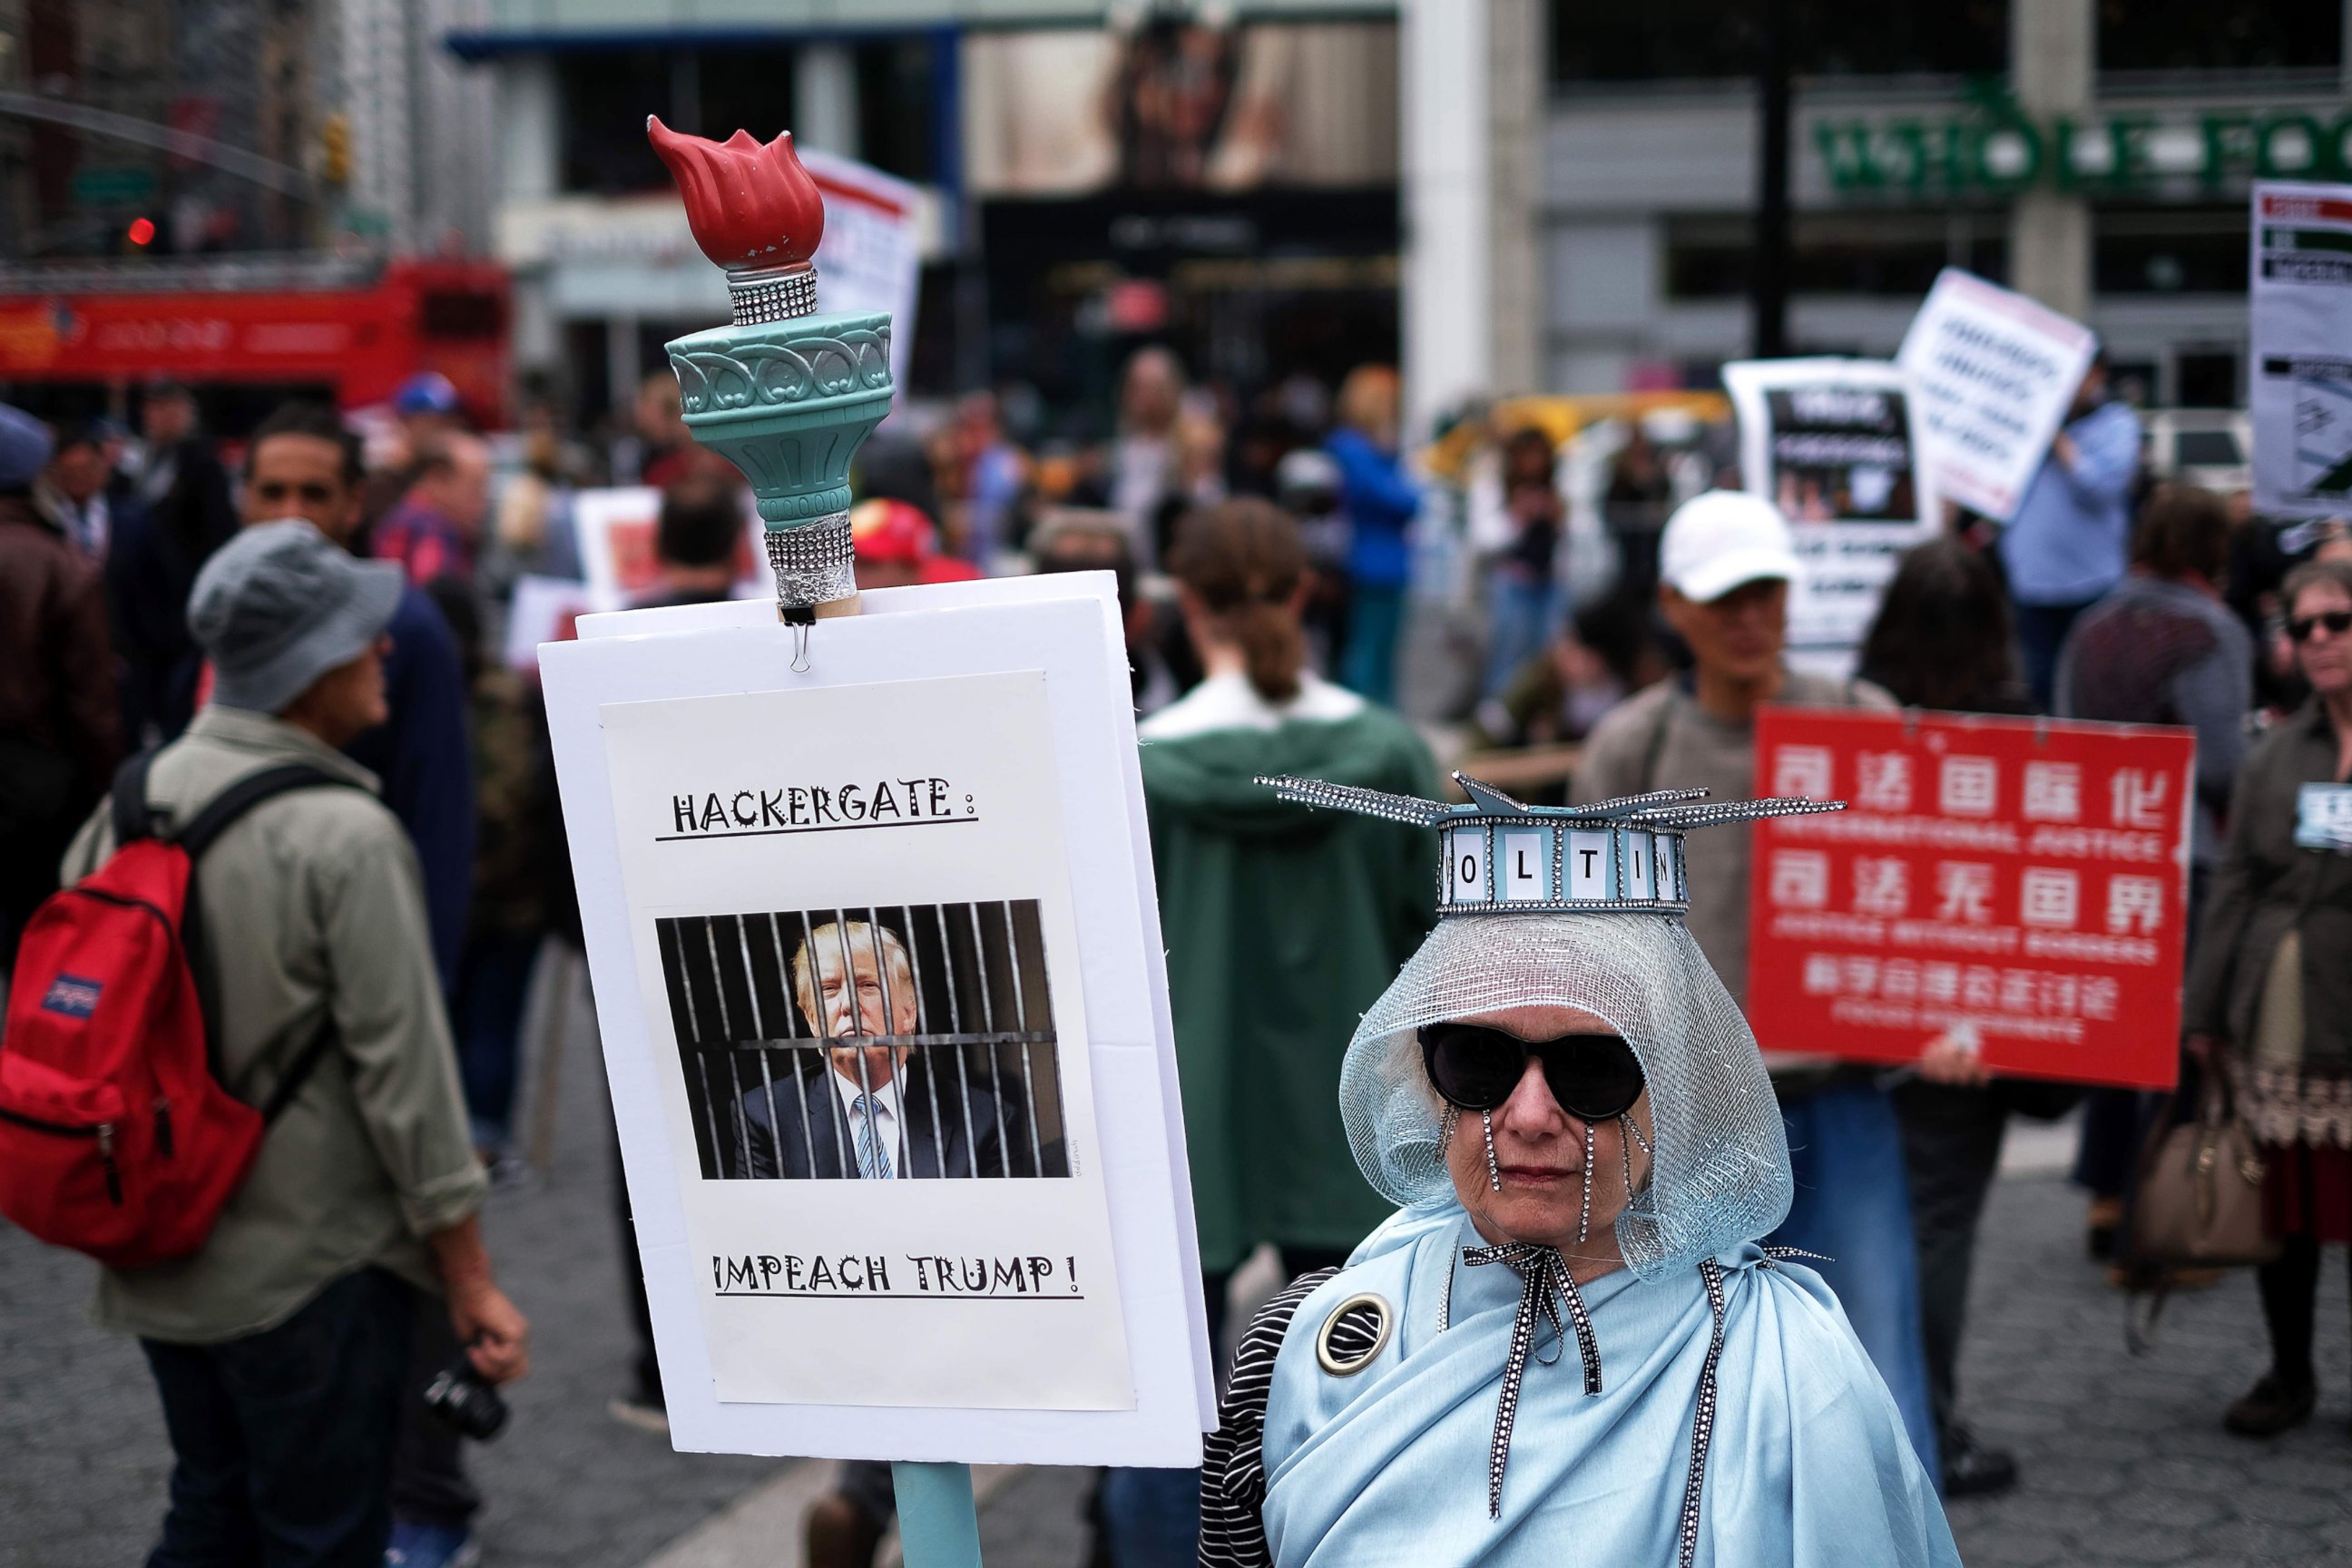 PHOTO: A protester displays a placard against President Donald Trump during a demonstration to mark May Day in New York, May 1, 2017.